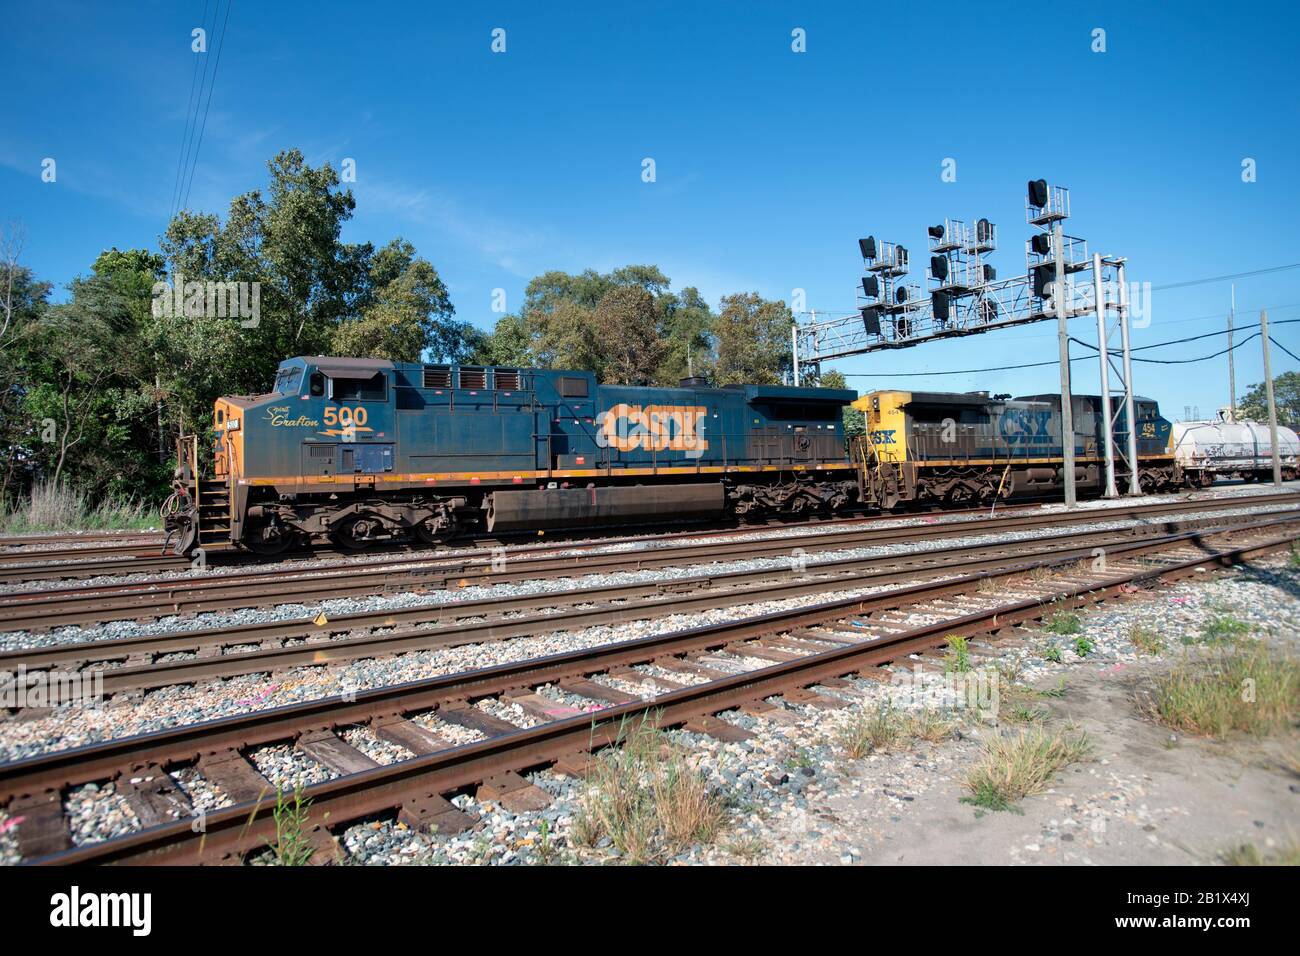 Dolton, Illinois, USA. A CSX (CSX Transportation) freight train moving on a busy multi-track route and under a signal tower. Stock Photo